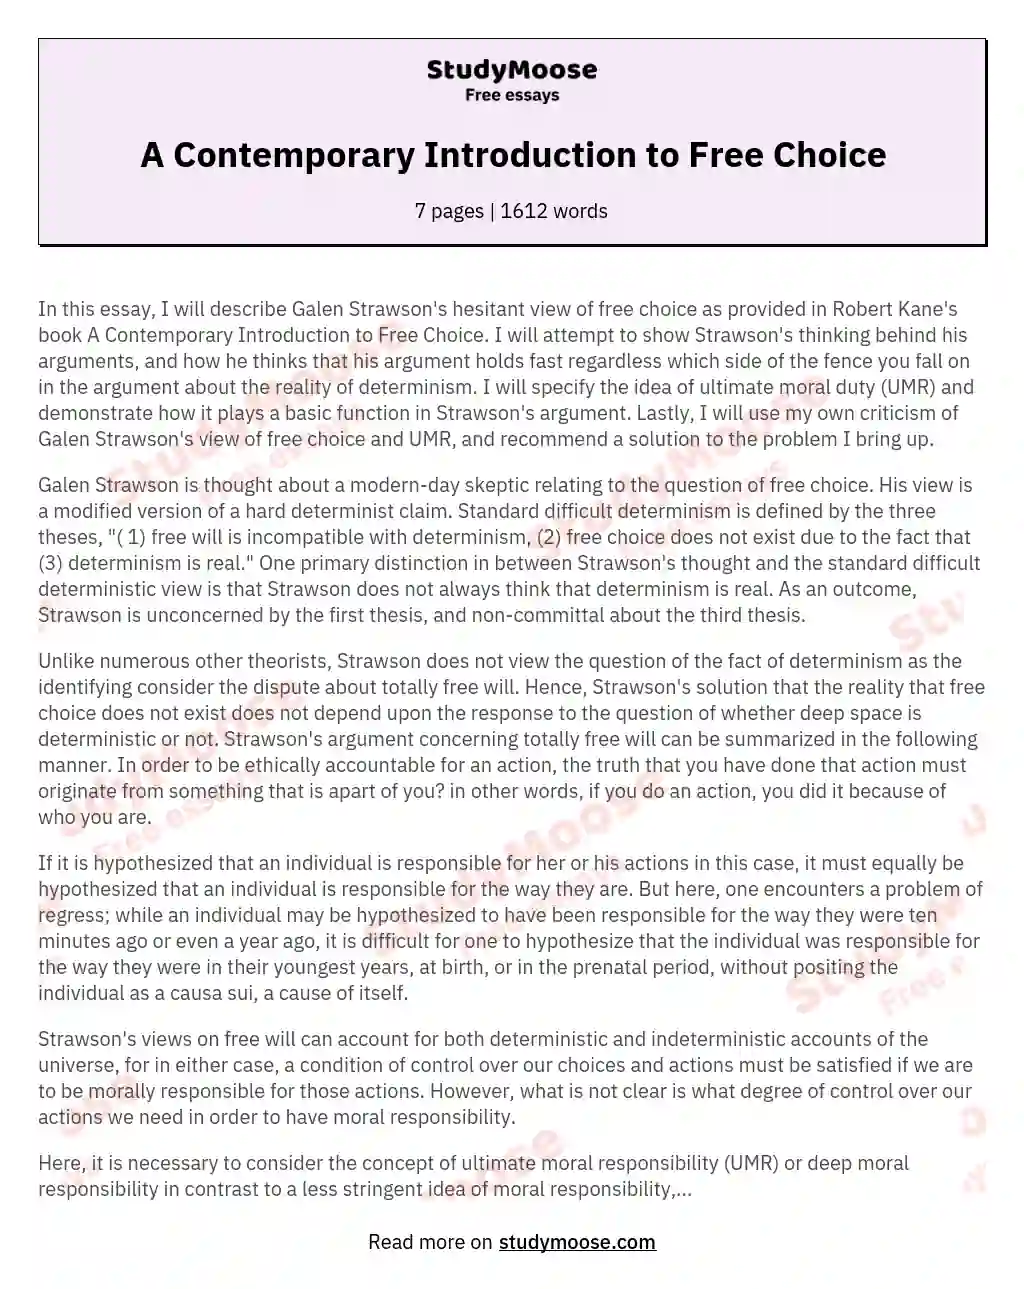 A Contemporary Introduction to Free Choice essay